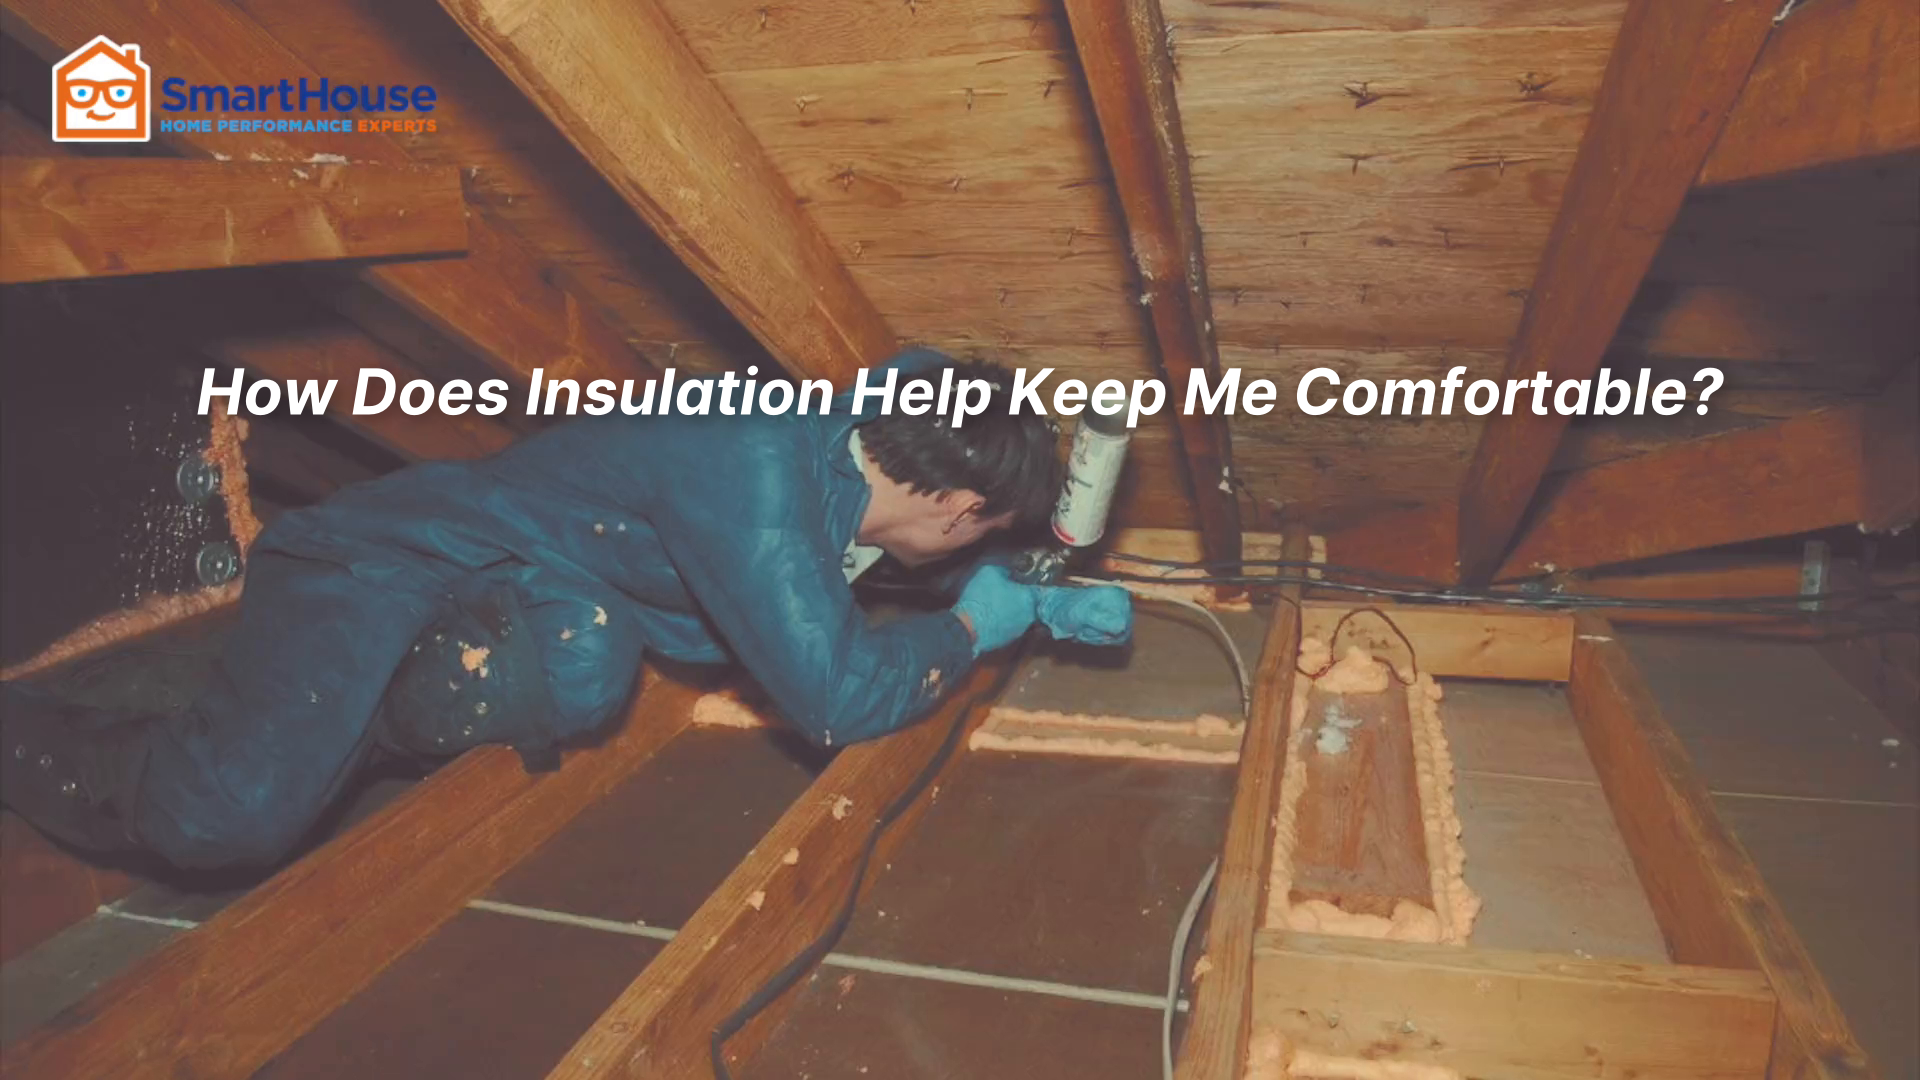 Still image of Insulation videographic from SmartHouse